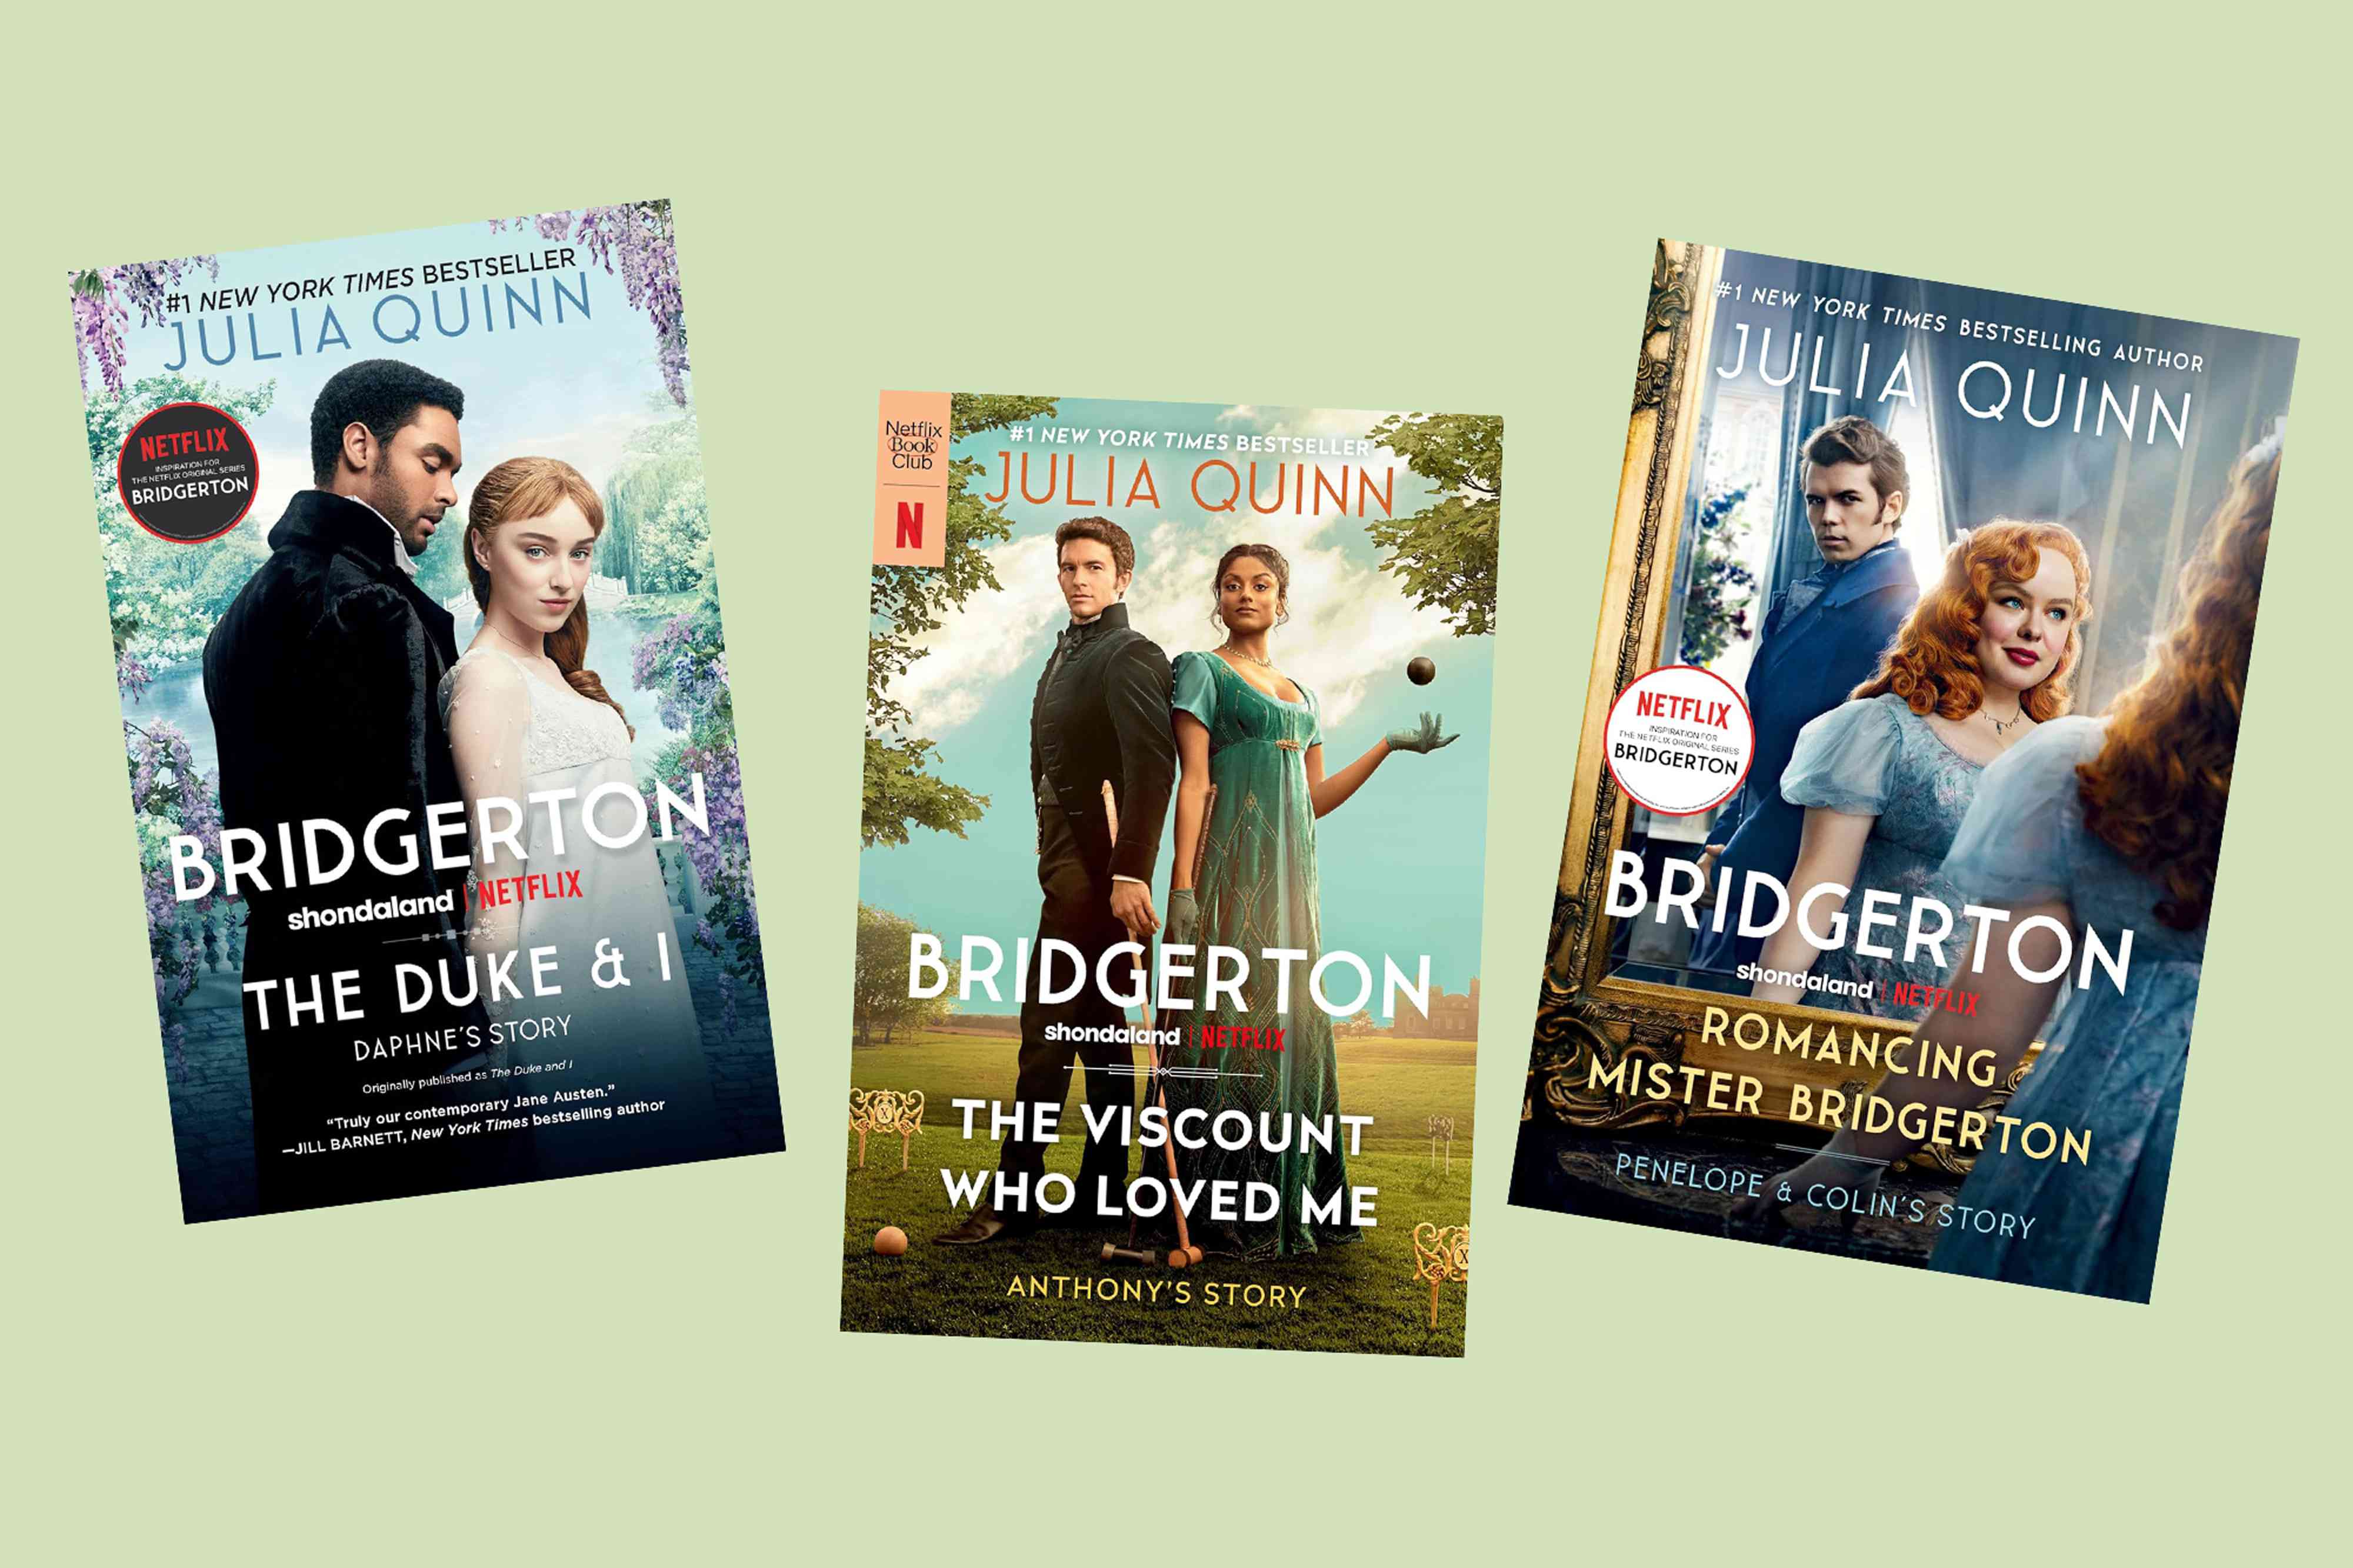 How to Read the“ Bridgerton” Books in Order (And How They Differ From the Netflix Show!)